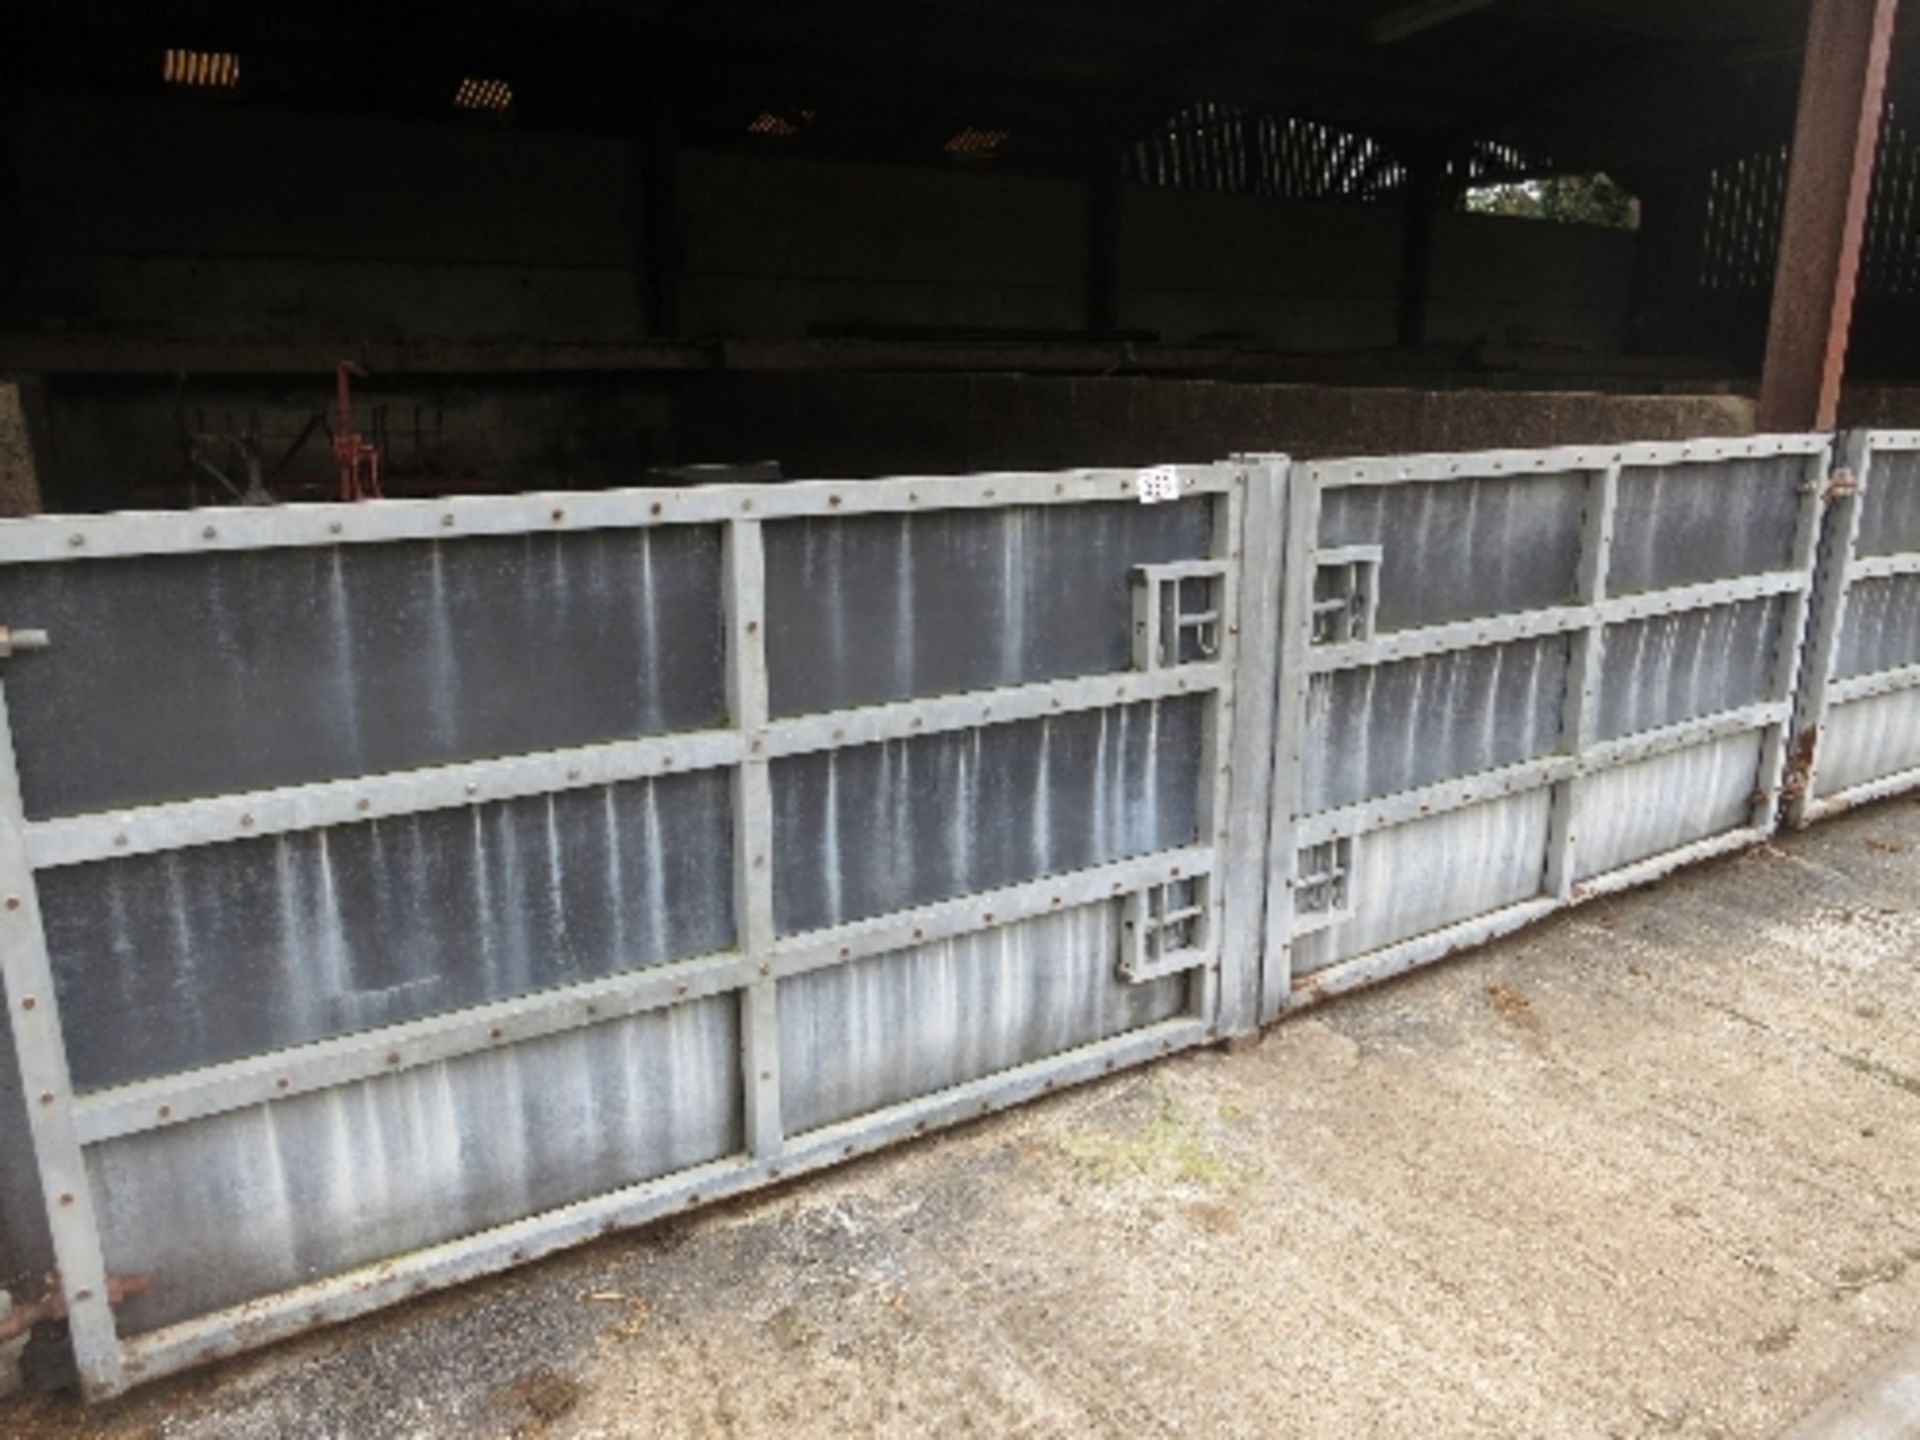 Pair of heavy duty galvanised and stock board sheeted yard gates each 2110 x 1230 (7ft x 4ft)